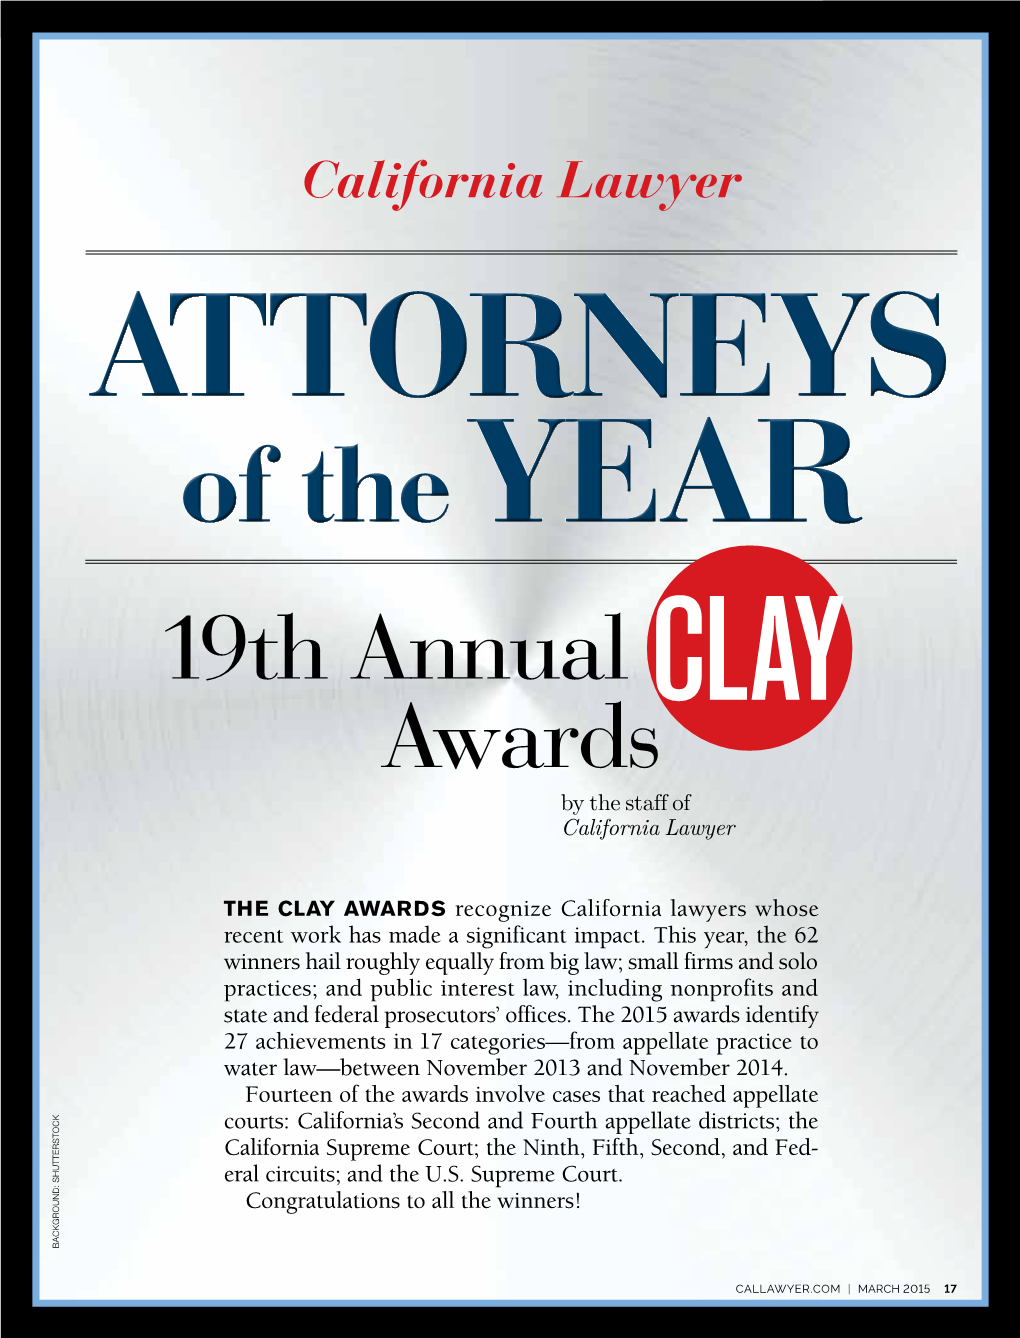 California Lawyer Attorneys of the Year CLAY